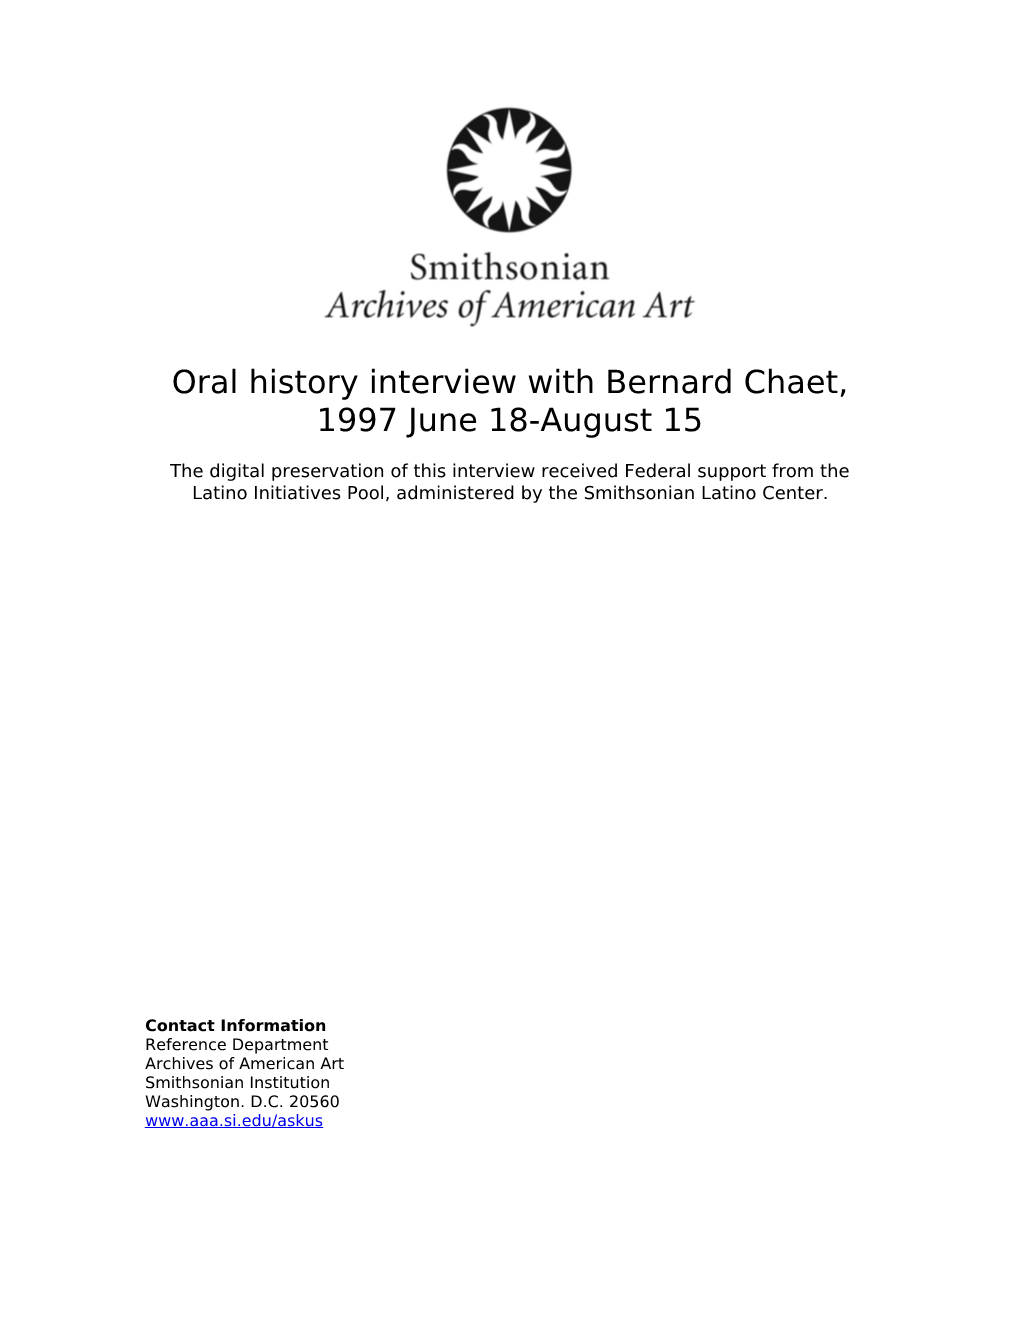 Oral History Interview with Bernard Chaet, 1997 June 18-August 15